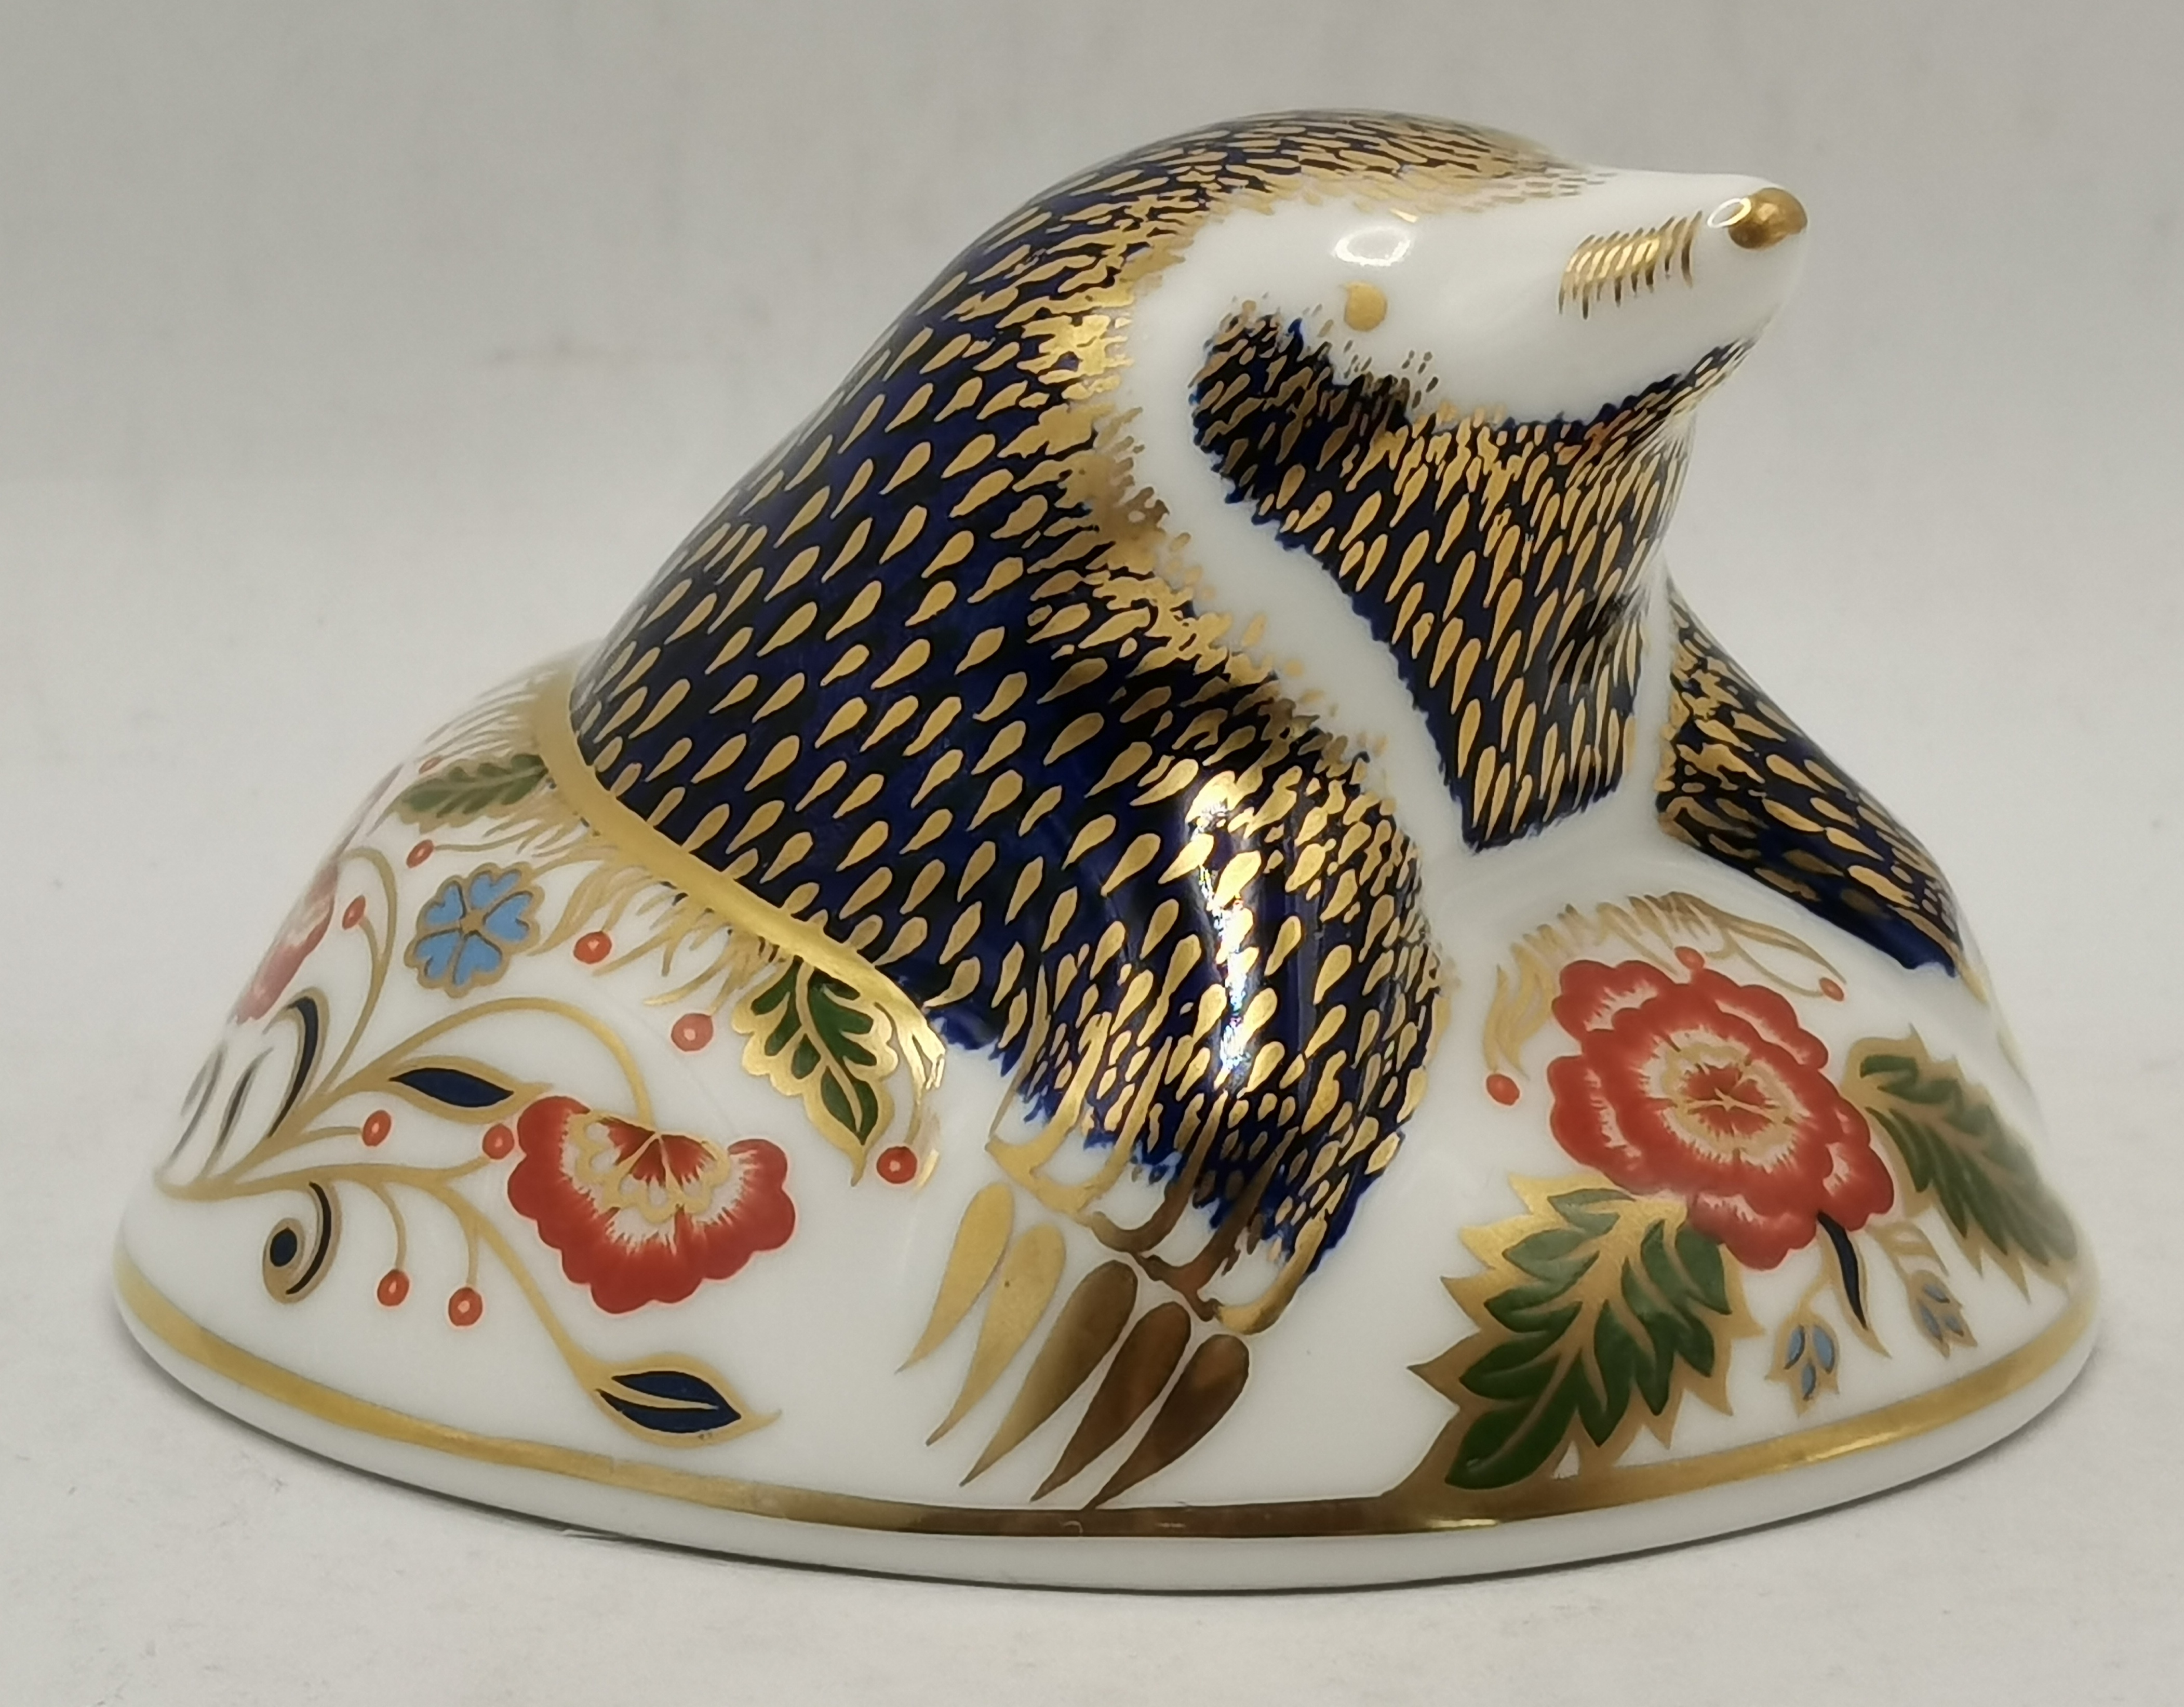 Royal Crown Derby "The Mole" Paperweight - Image 2 of 3